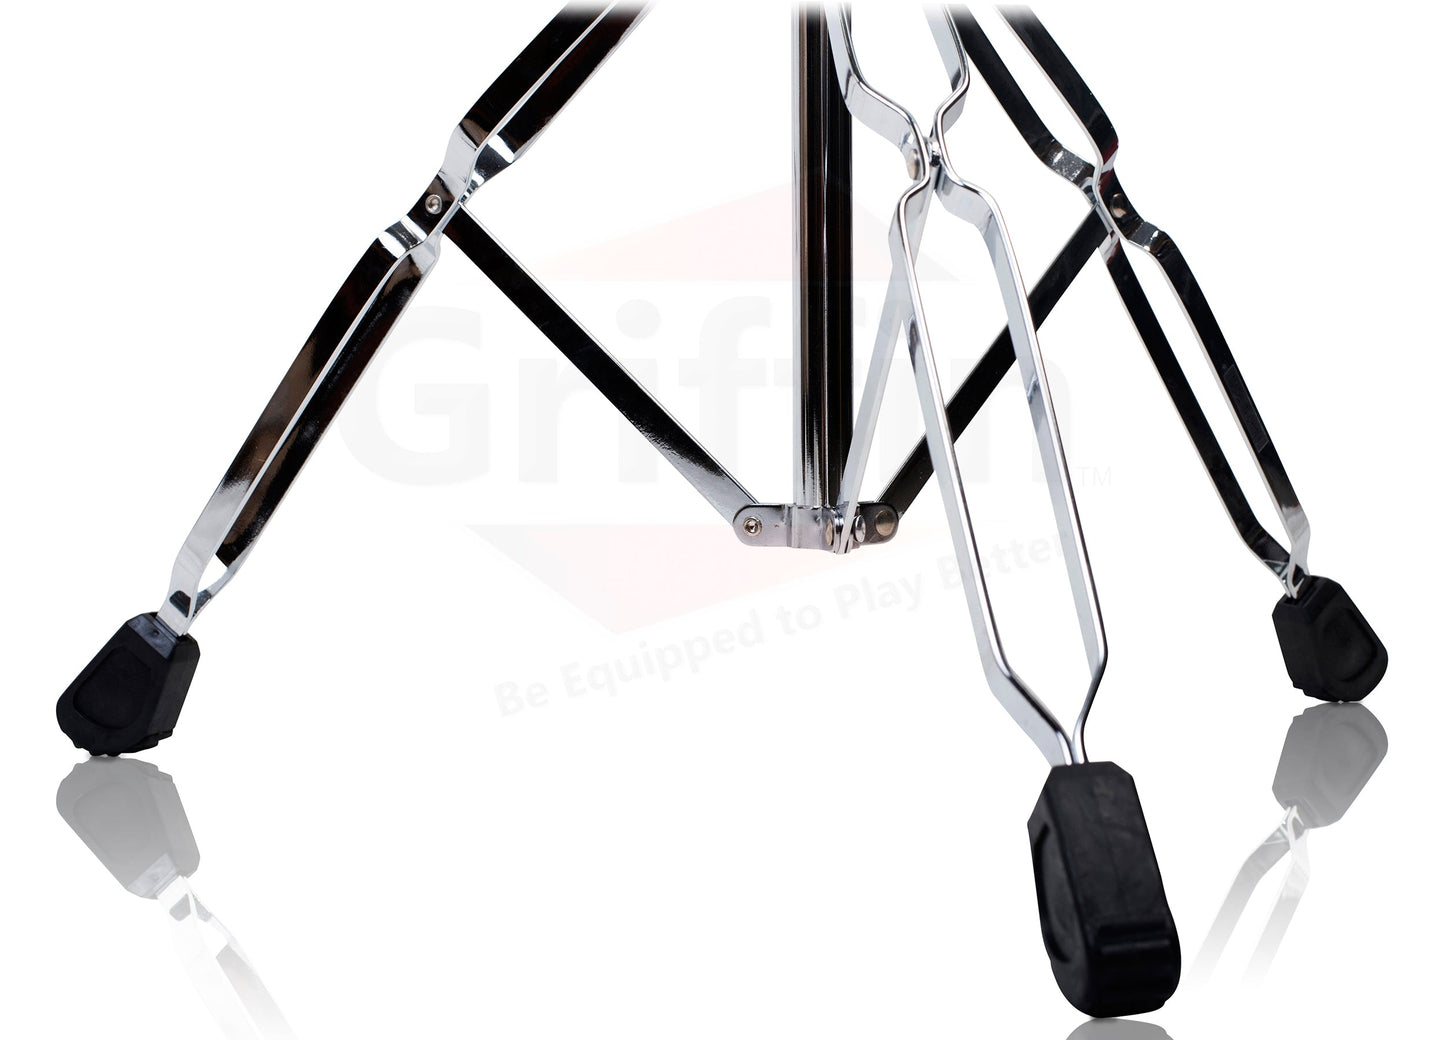 Cymbal Boom Stand & Straight Cymbal Stand Combo (Pack of 2) by GRIFFIN - Percussion Drum Hardware Set for Mounting & Holding Crash, Ride, Splash